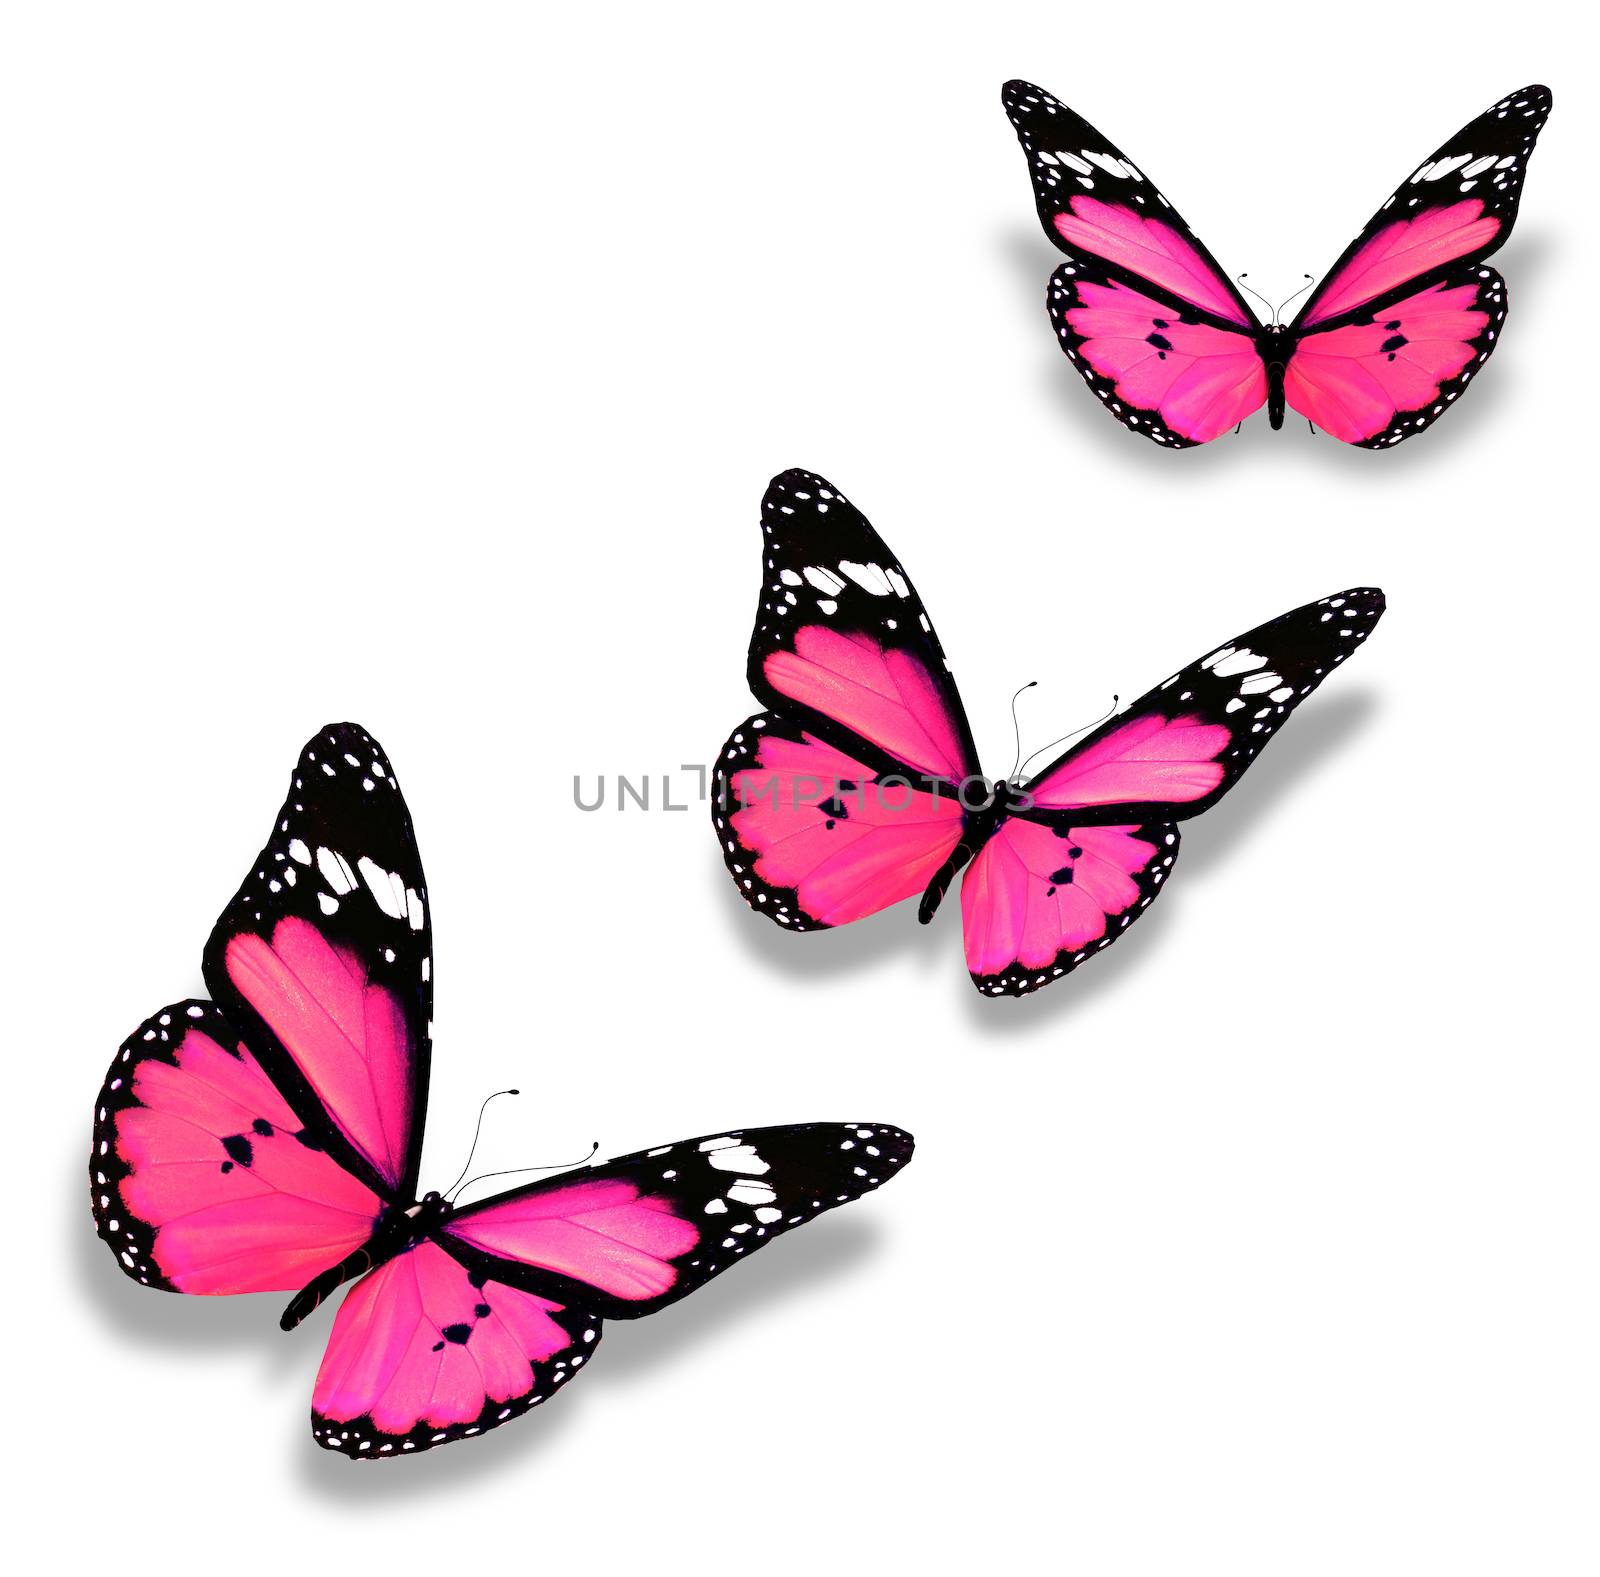 Three pink butterflies, isolated on white by suns_28